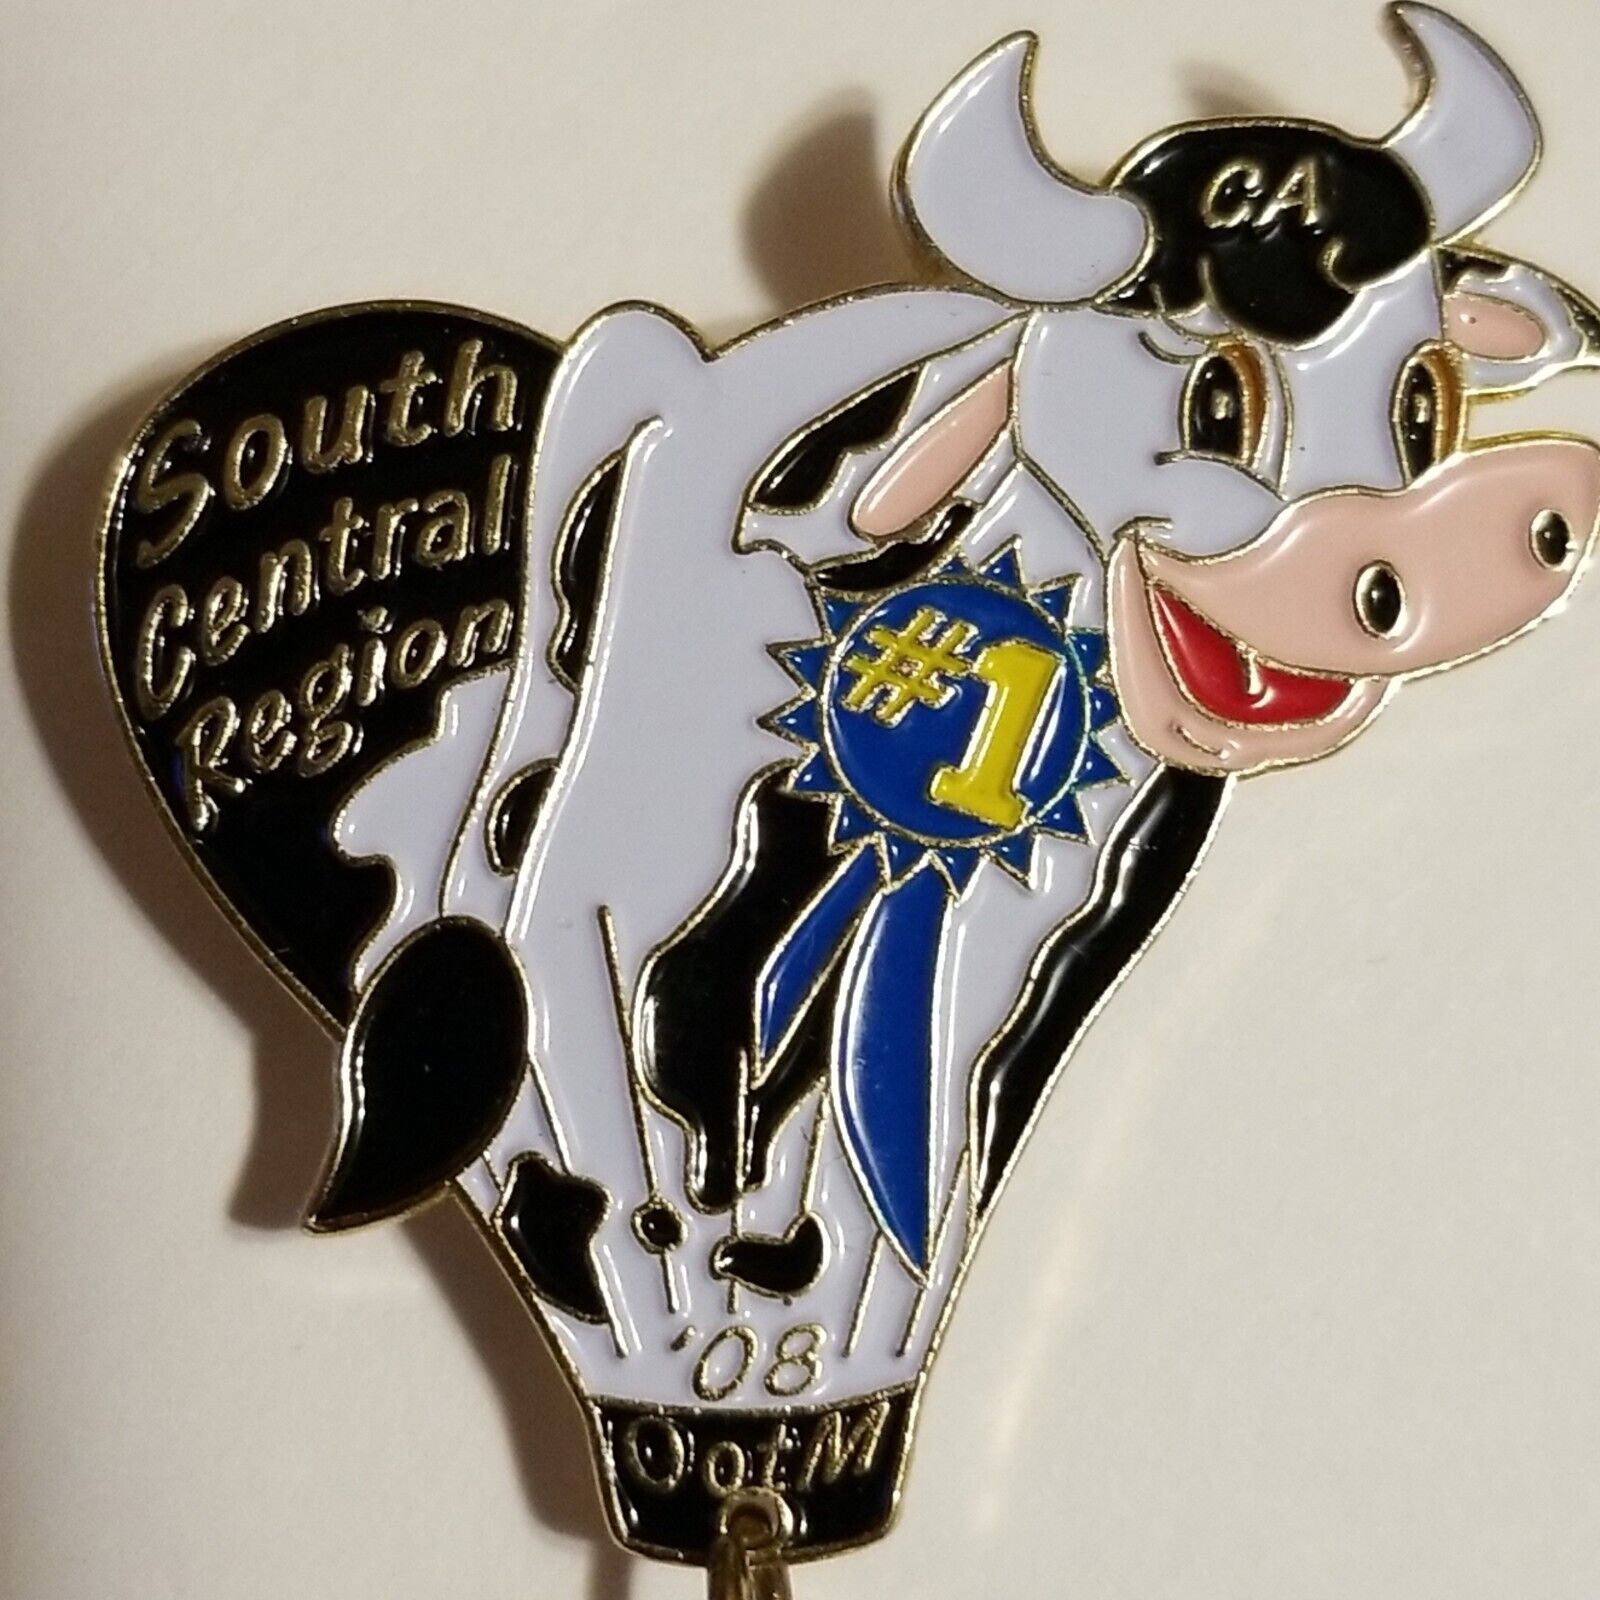 CA OOTM PIN💥 ODYSSSEY OF THE MIND 2008💥SOUTH CENTRAL REGION BLUE RIBBON COW OM